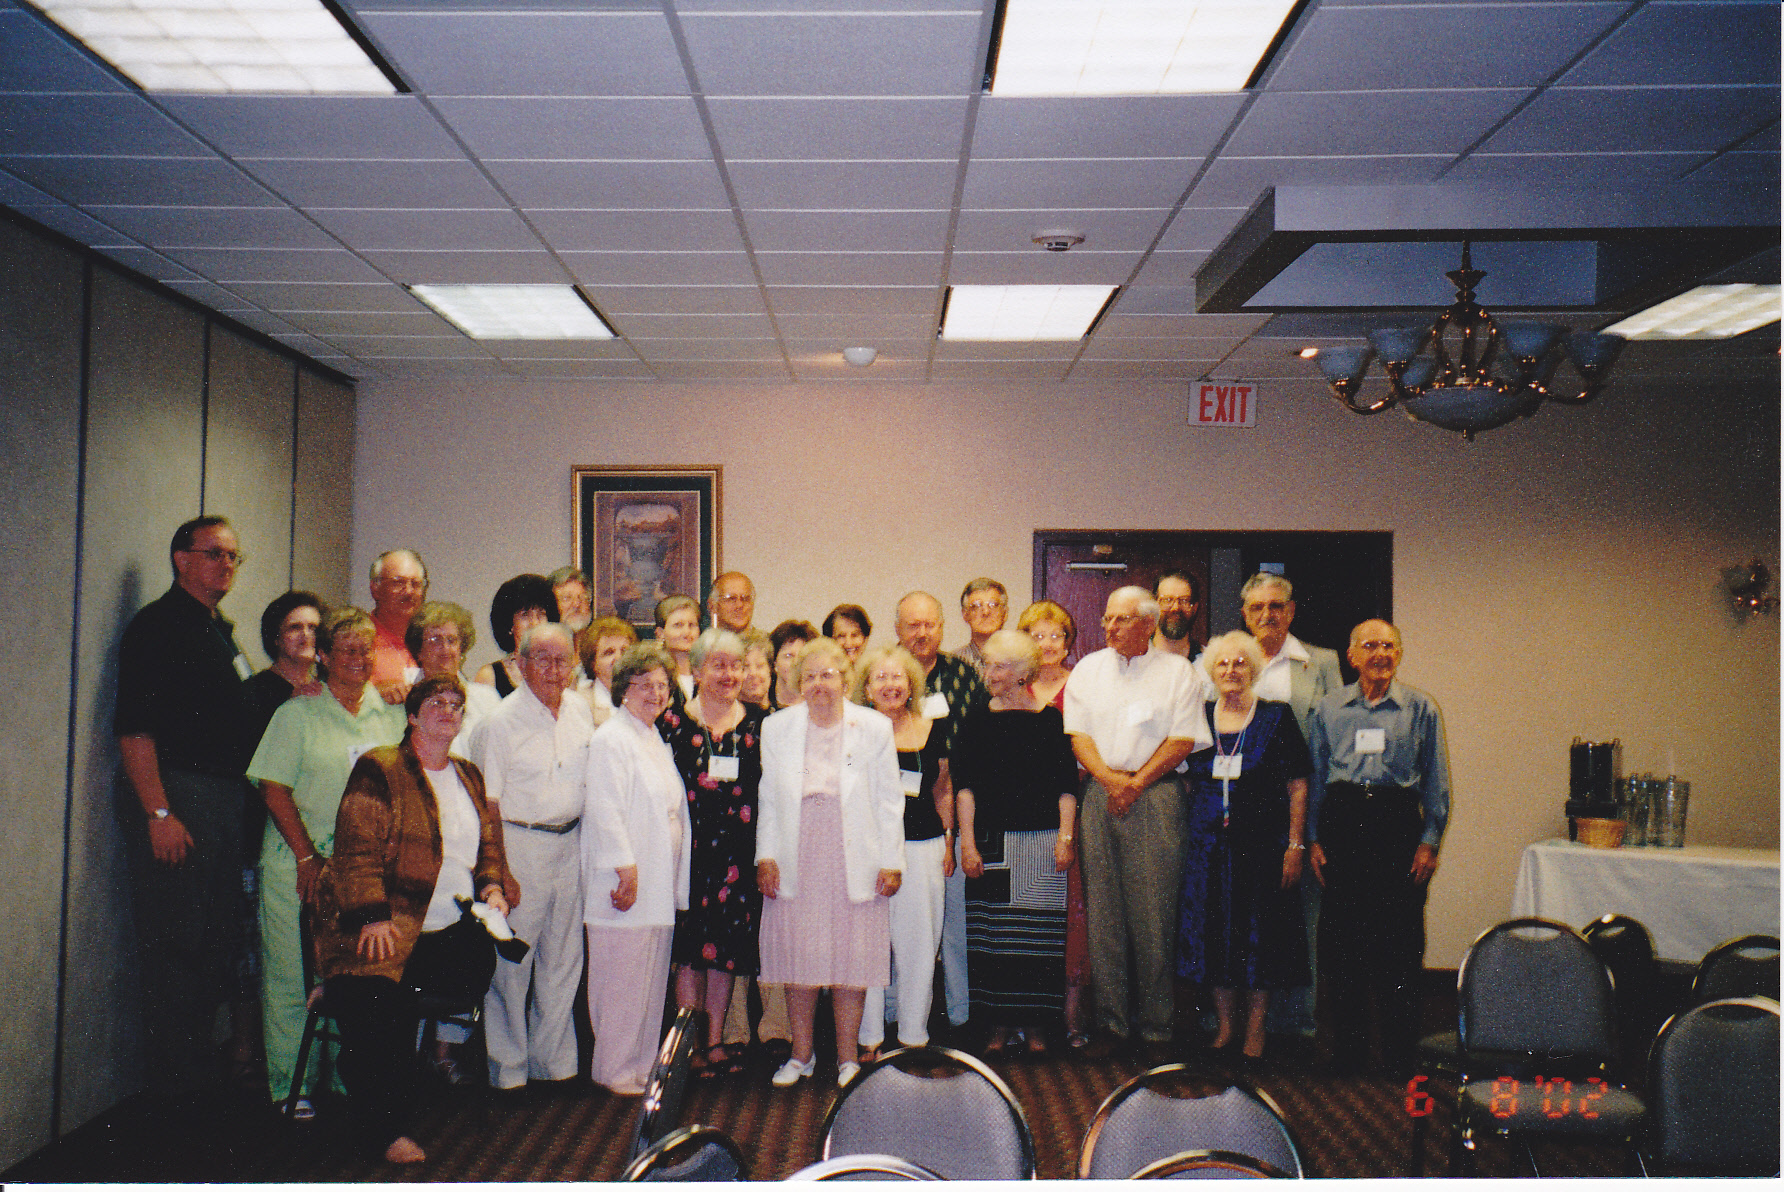 2002 OFHS meeting in Knoxville, TN (Descendants of John Owsley born 1757